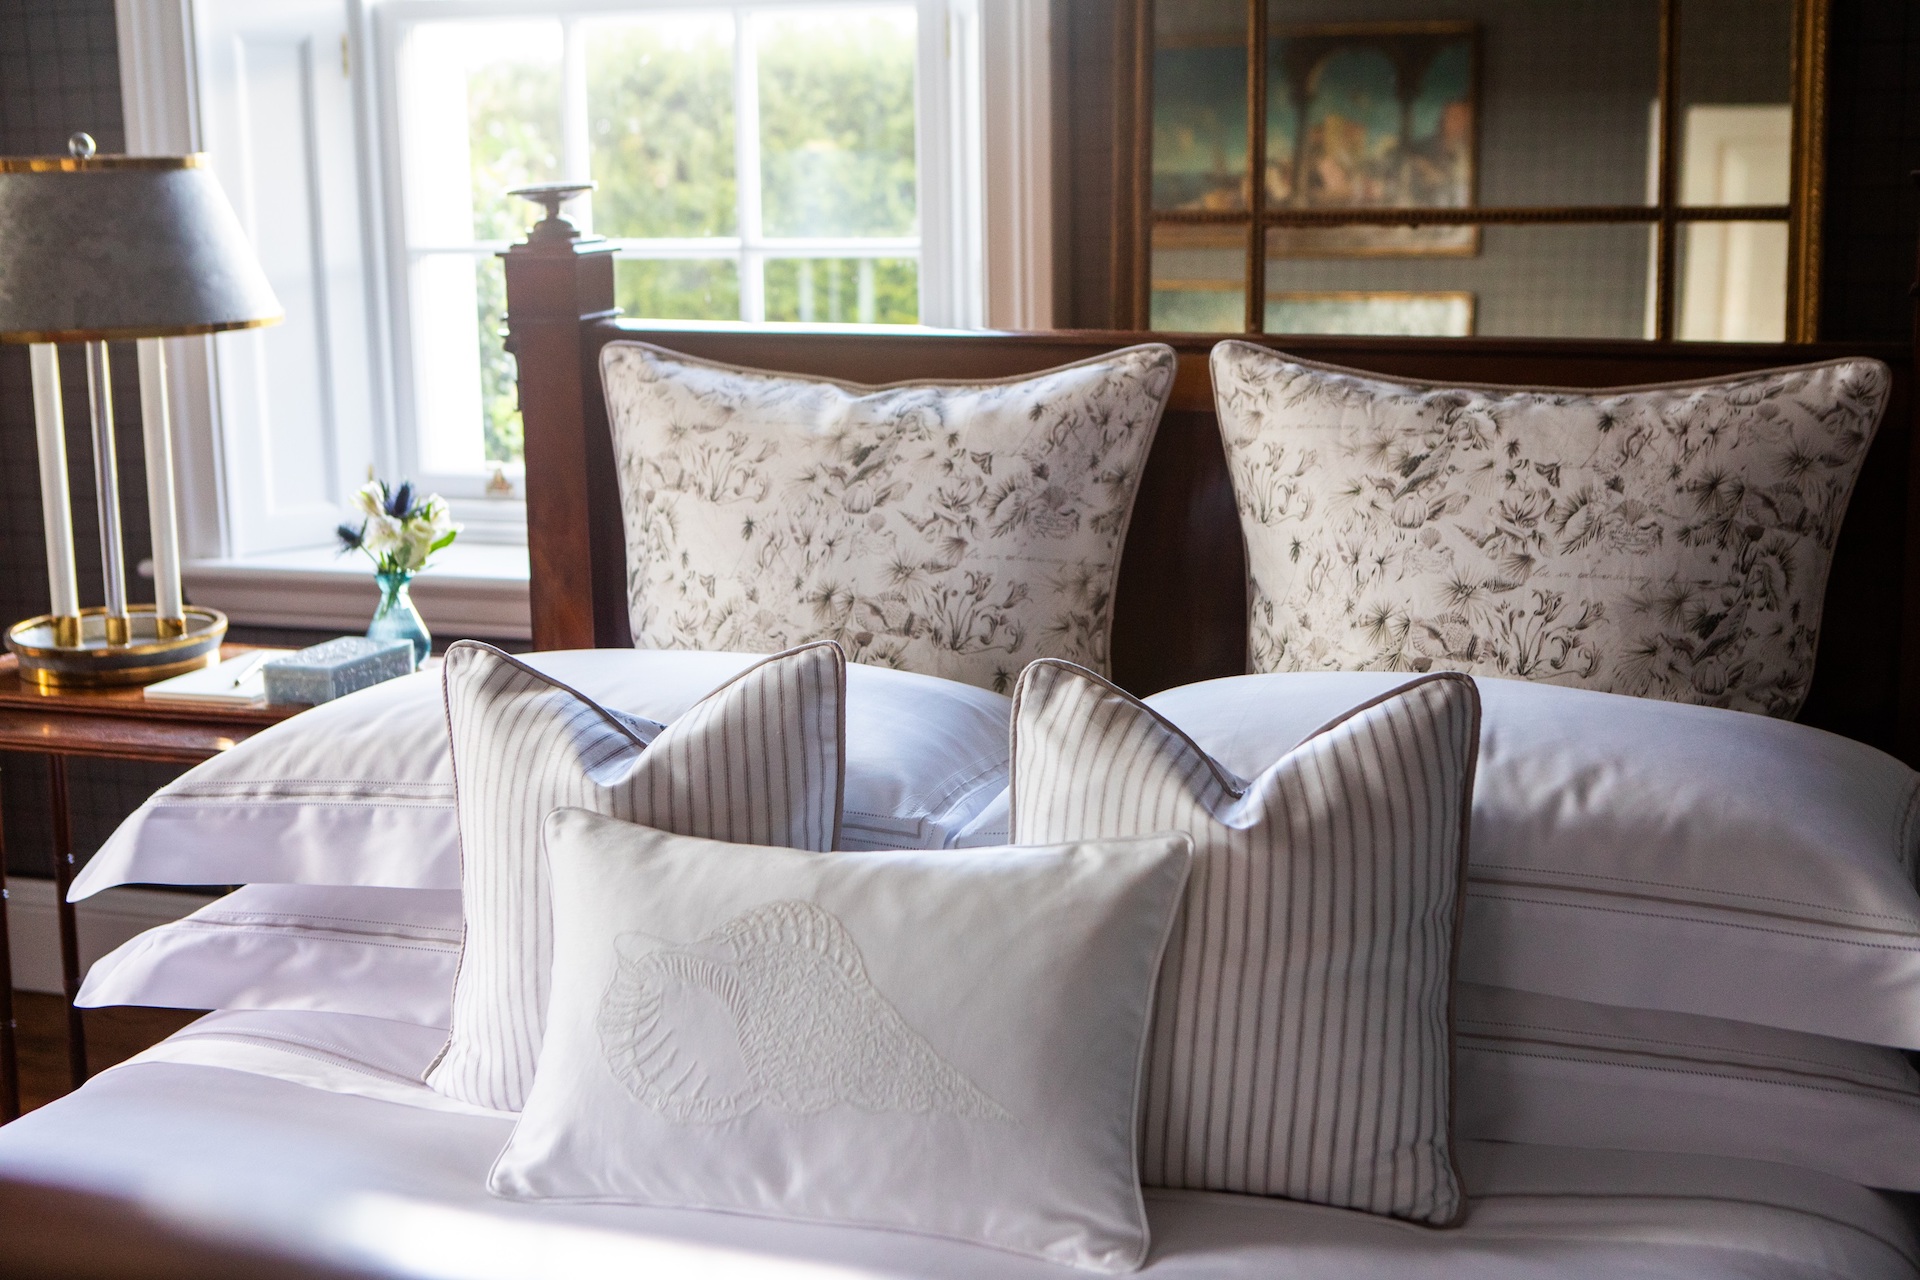 Bedlinen by India Hicks for Heirlooms Linens